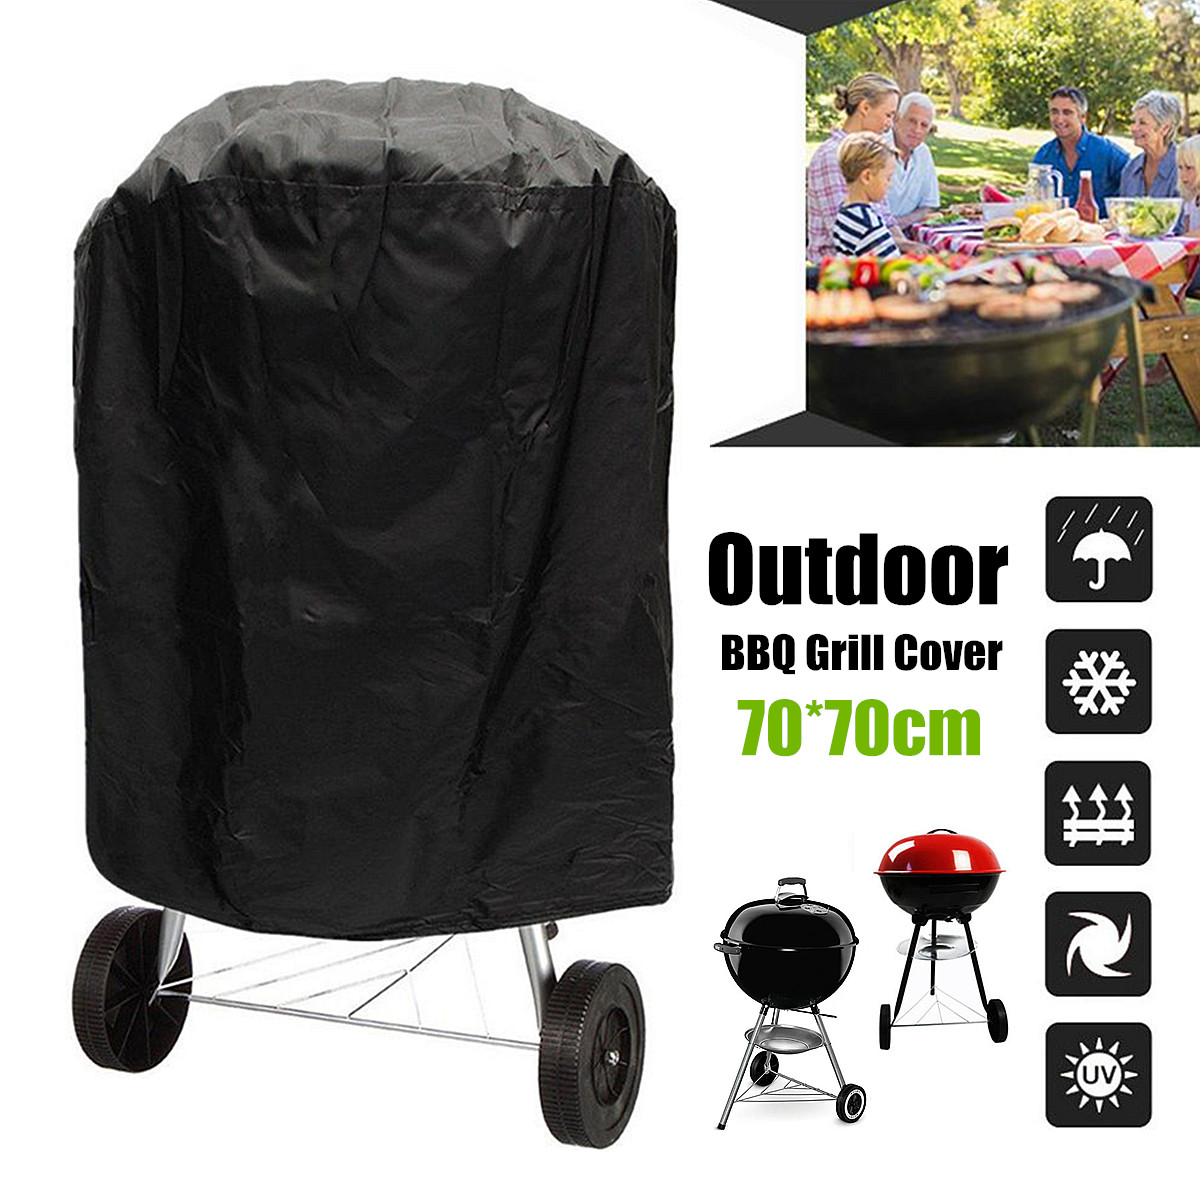 Outdoor-Waterproof-Round-Kettle-BBQ-Grill-Barbecue-Cover-Protector-UV-Resistant-1286049-2